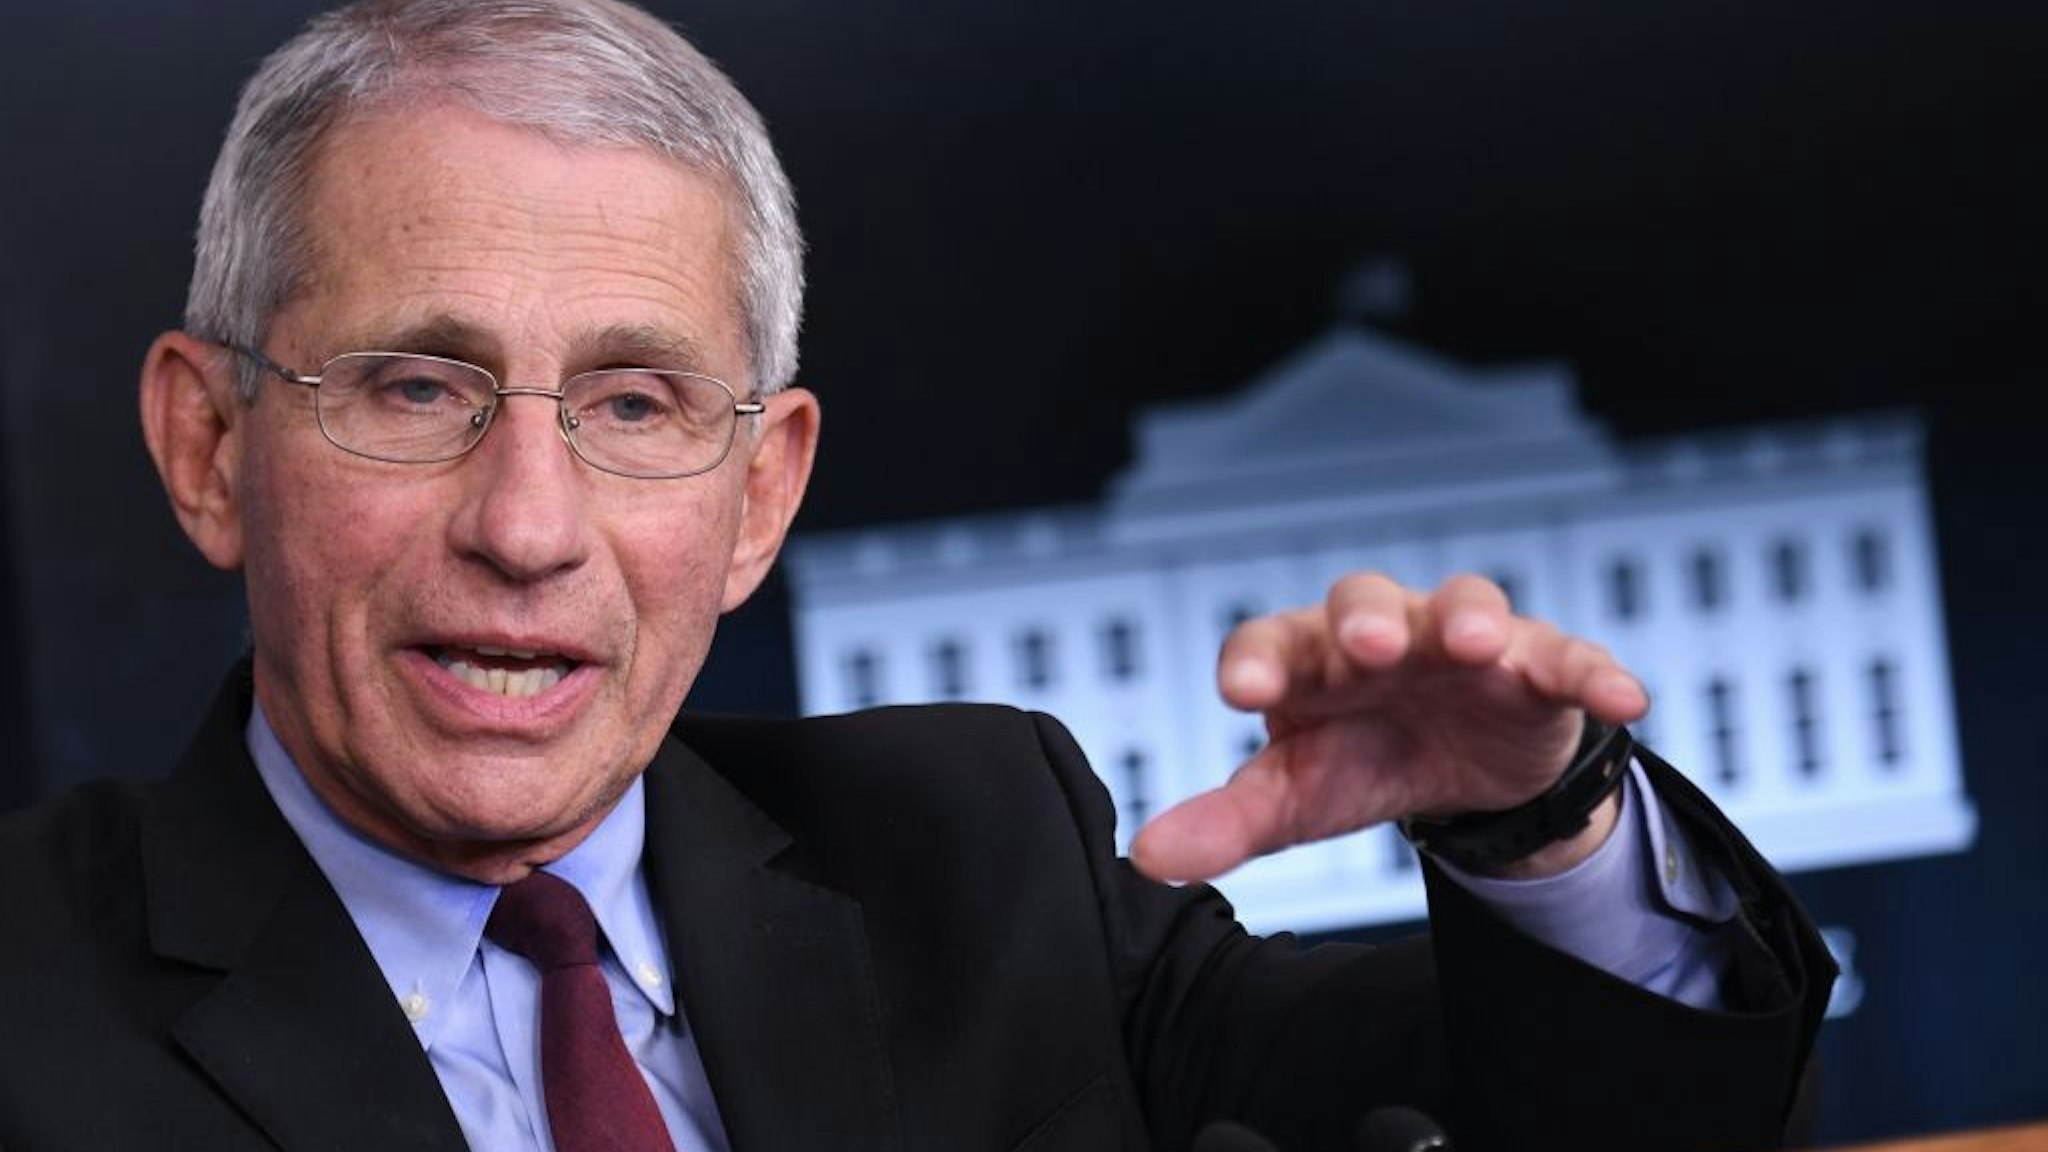 Director of the National Institute of Allergy and Infectious Diseases Anthony Fauci speaks during an unscheduled briefing after a Coronavirus Task Force meeting at the White House on April 5, 2020, in Washington, DC. (Photo by Eric BARADAT / AFP)